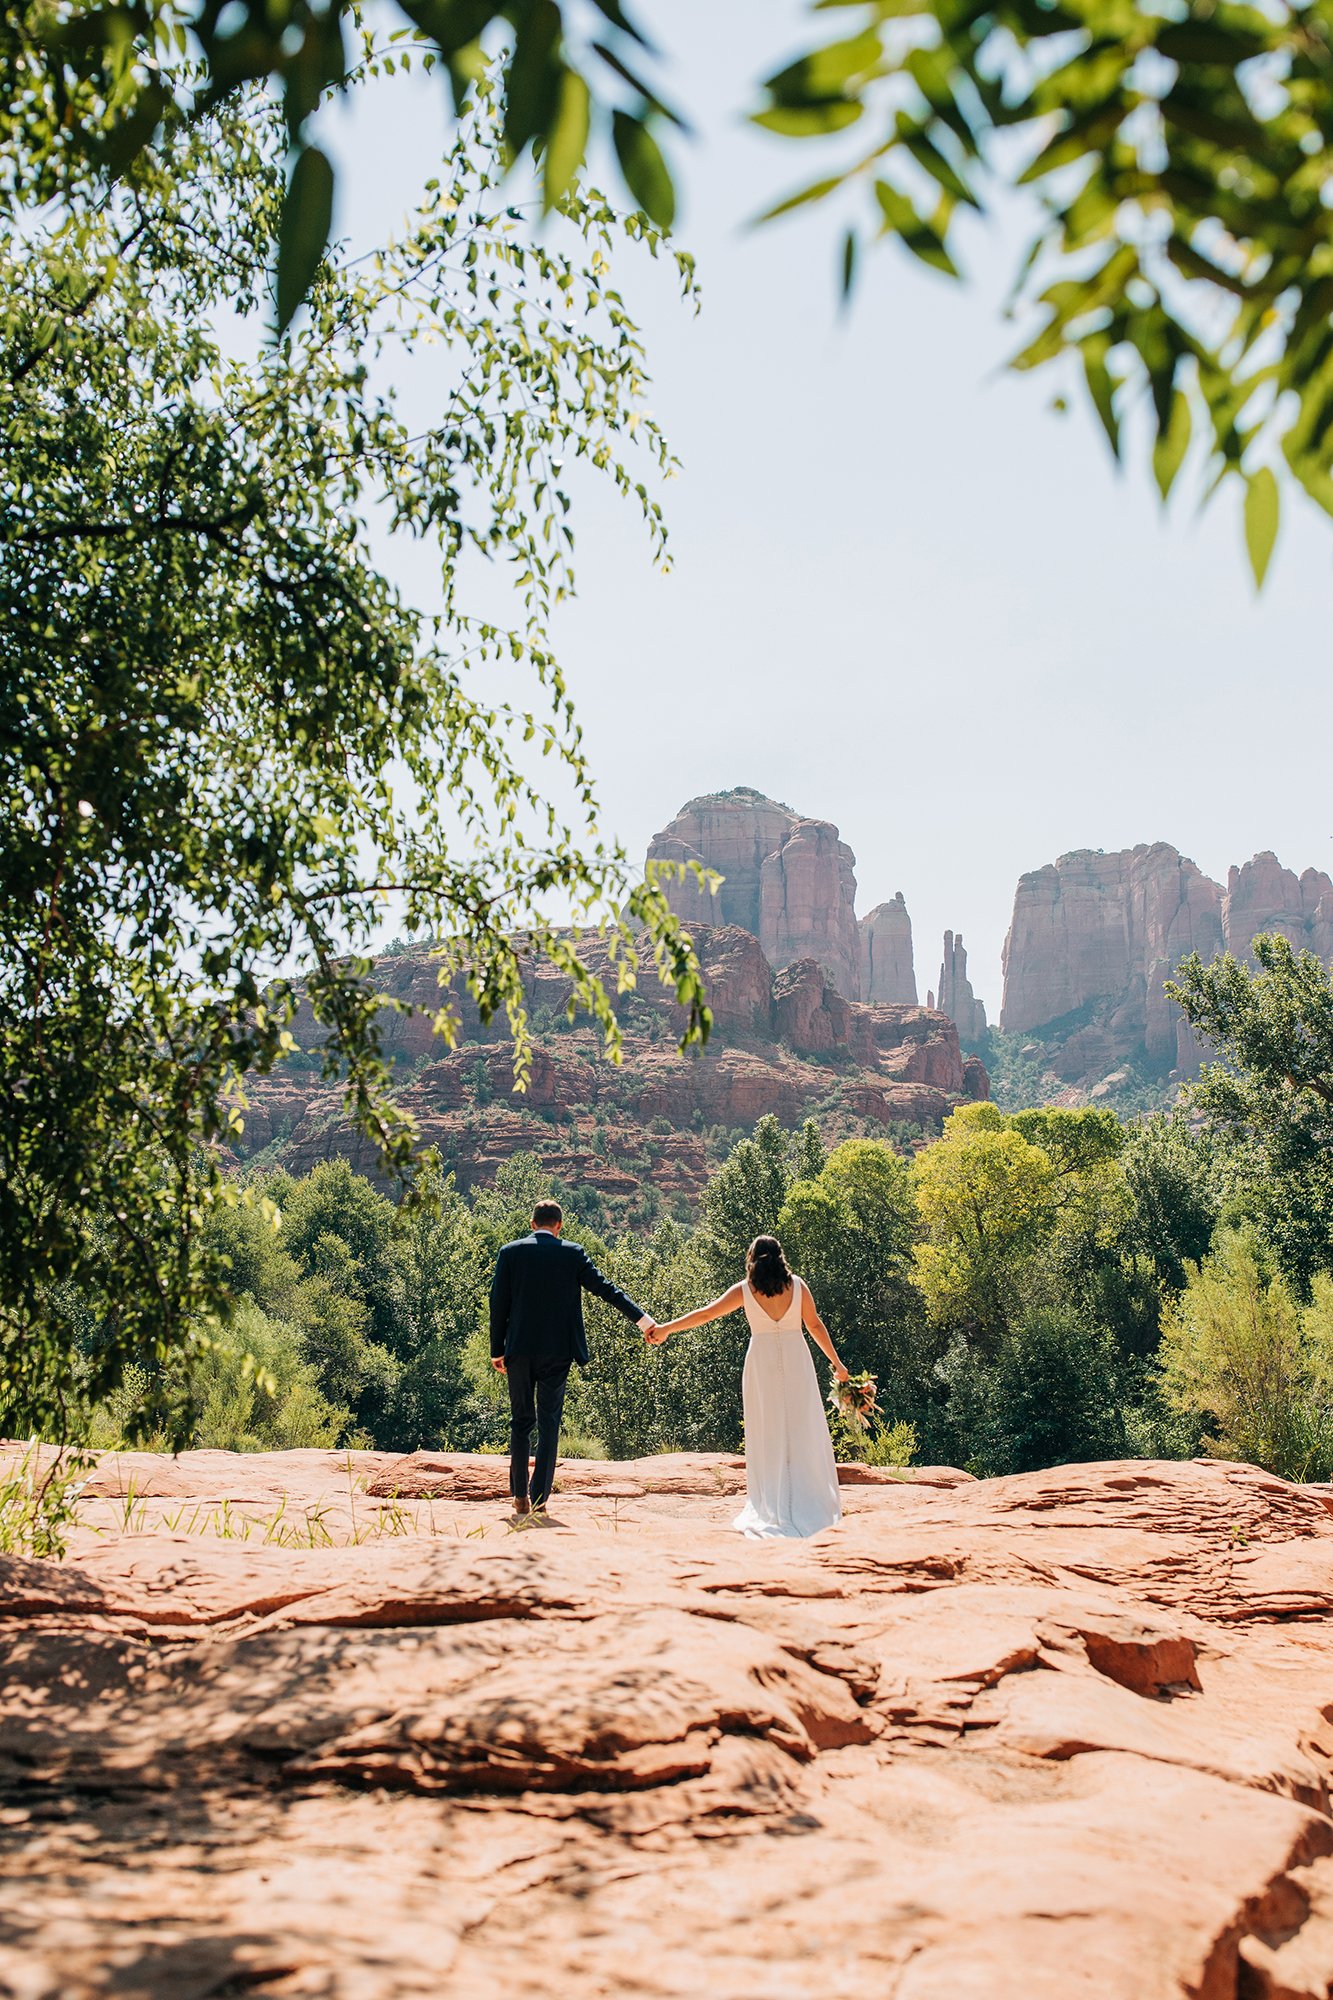 Stephanie and Matthew take in the Sedona view with awe during in this elopement photo